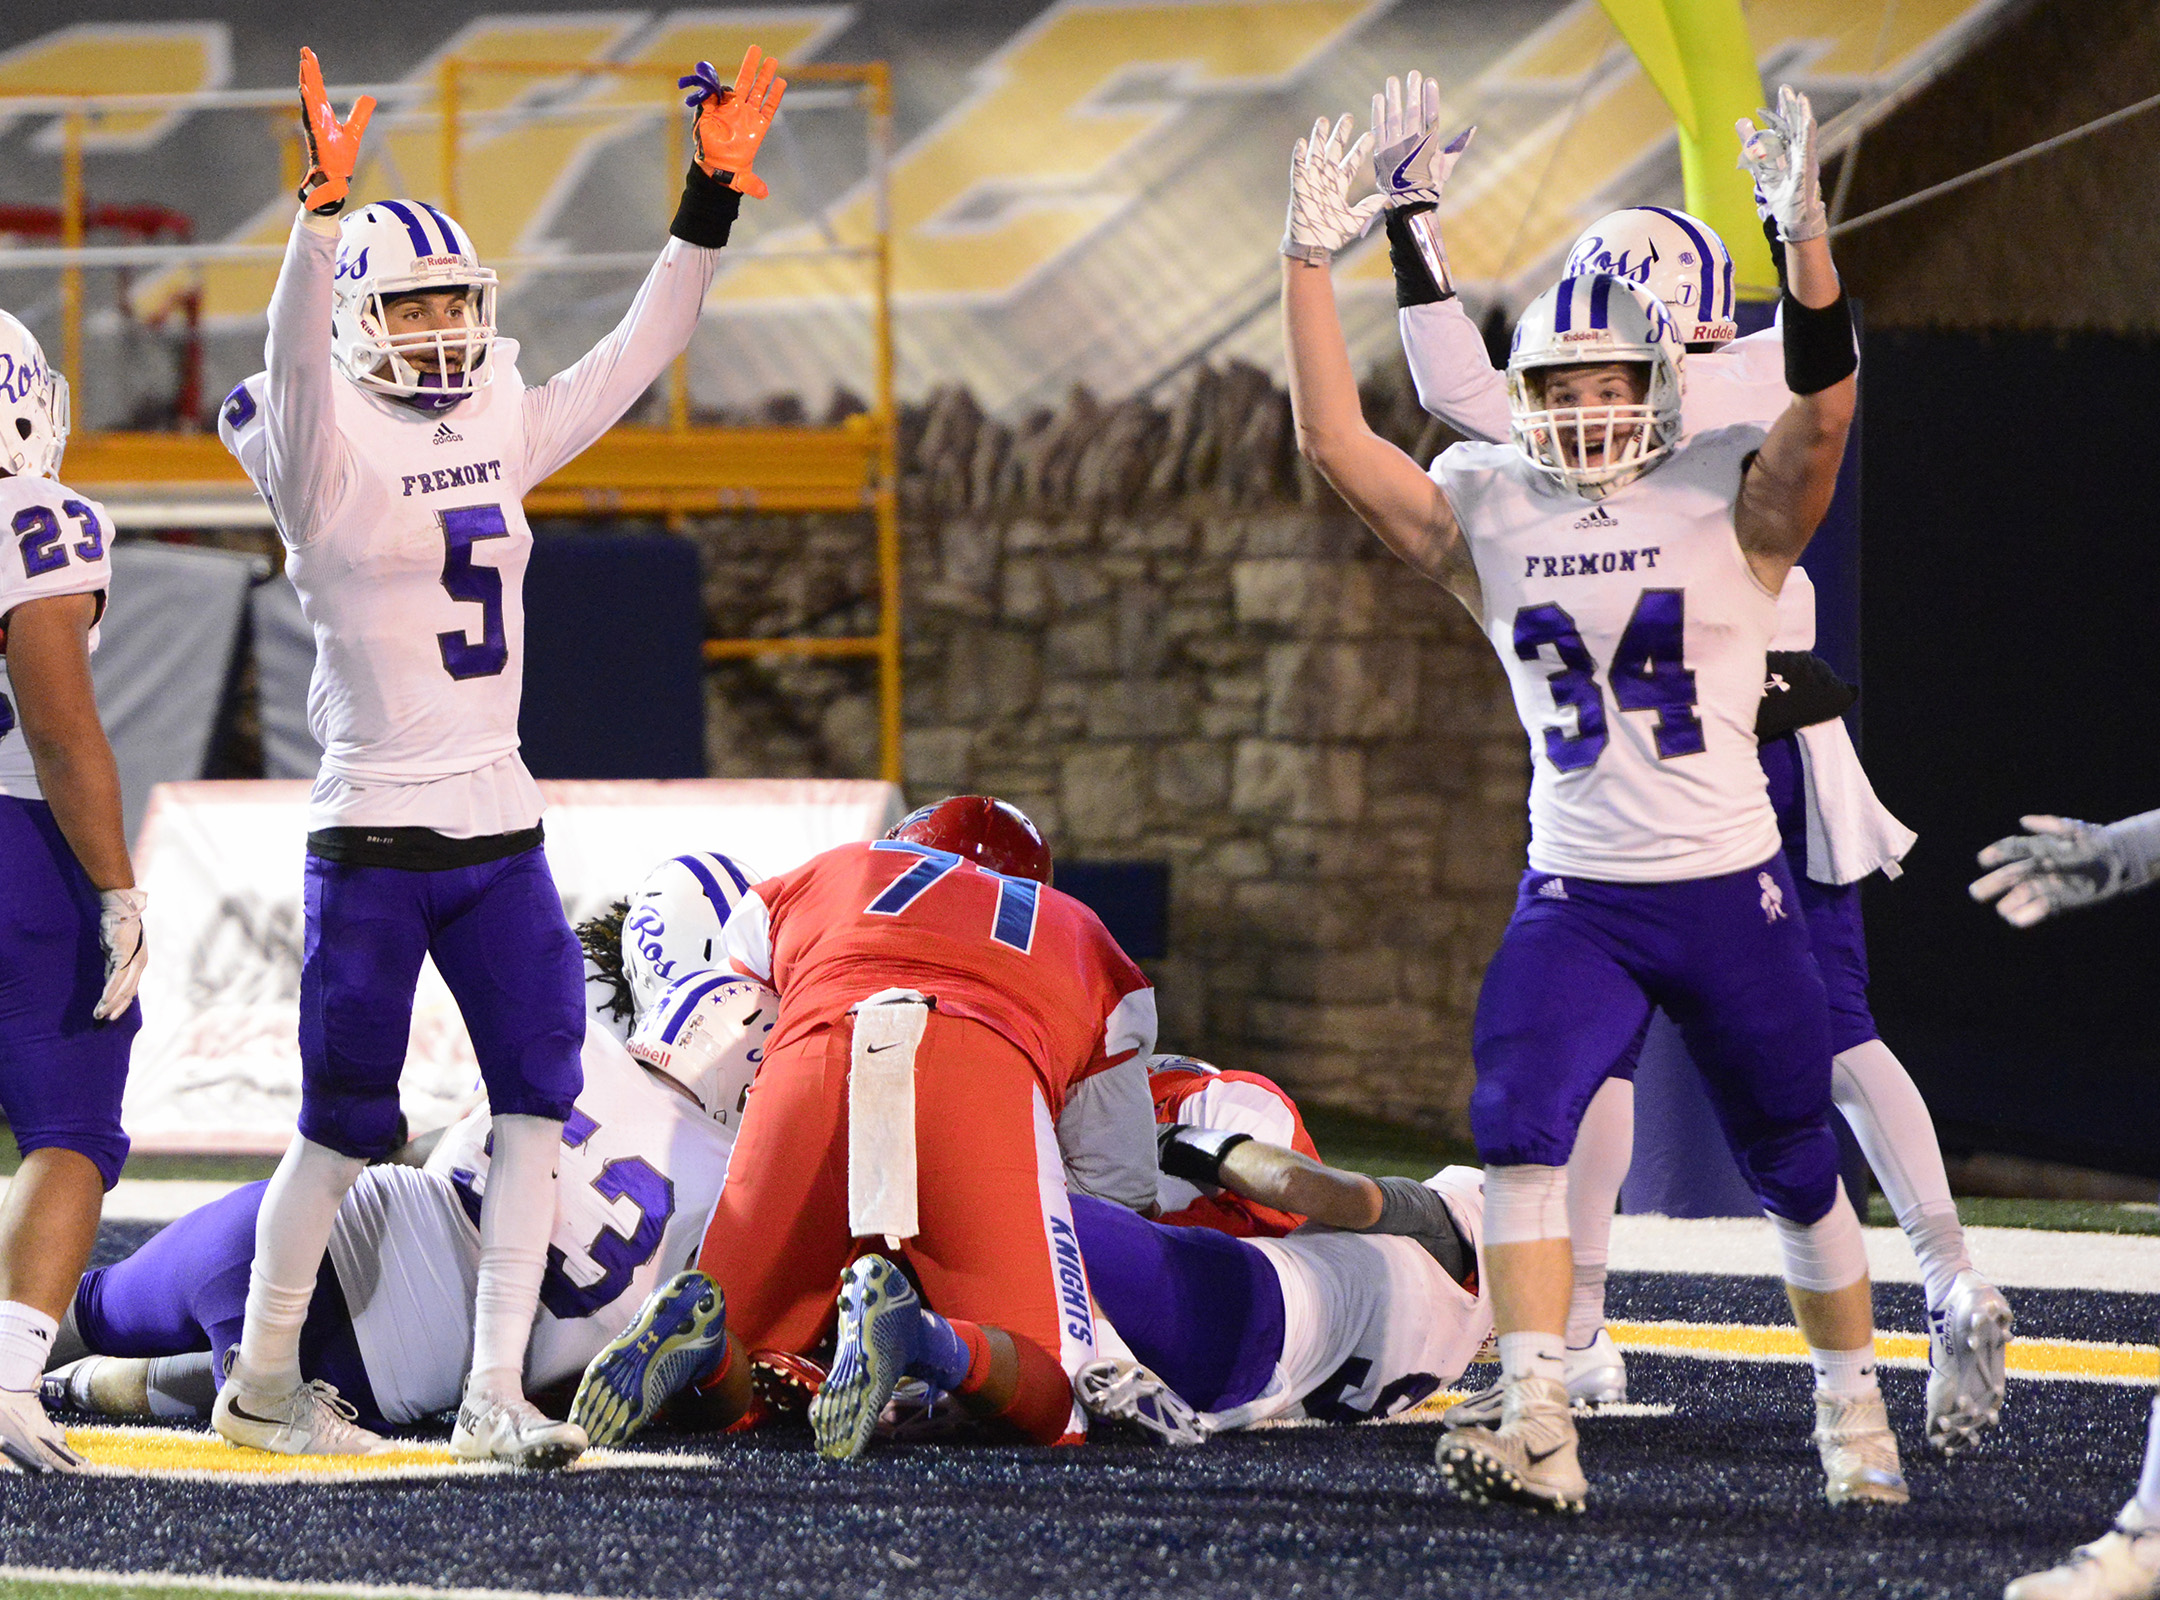 Ross celebrates scoring a touchdown after a bad snap on a St. Francis punt.